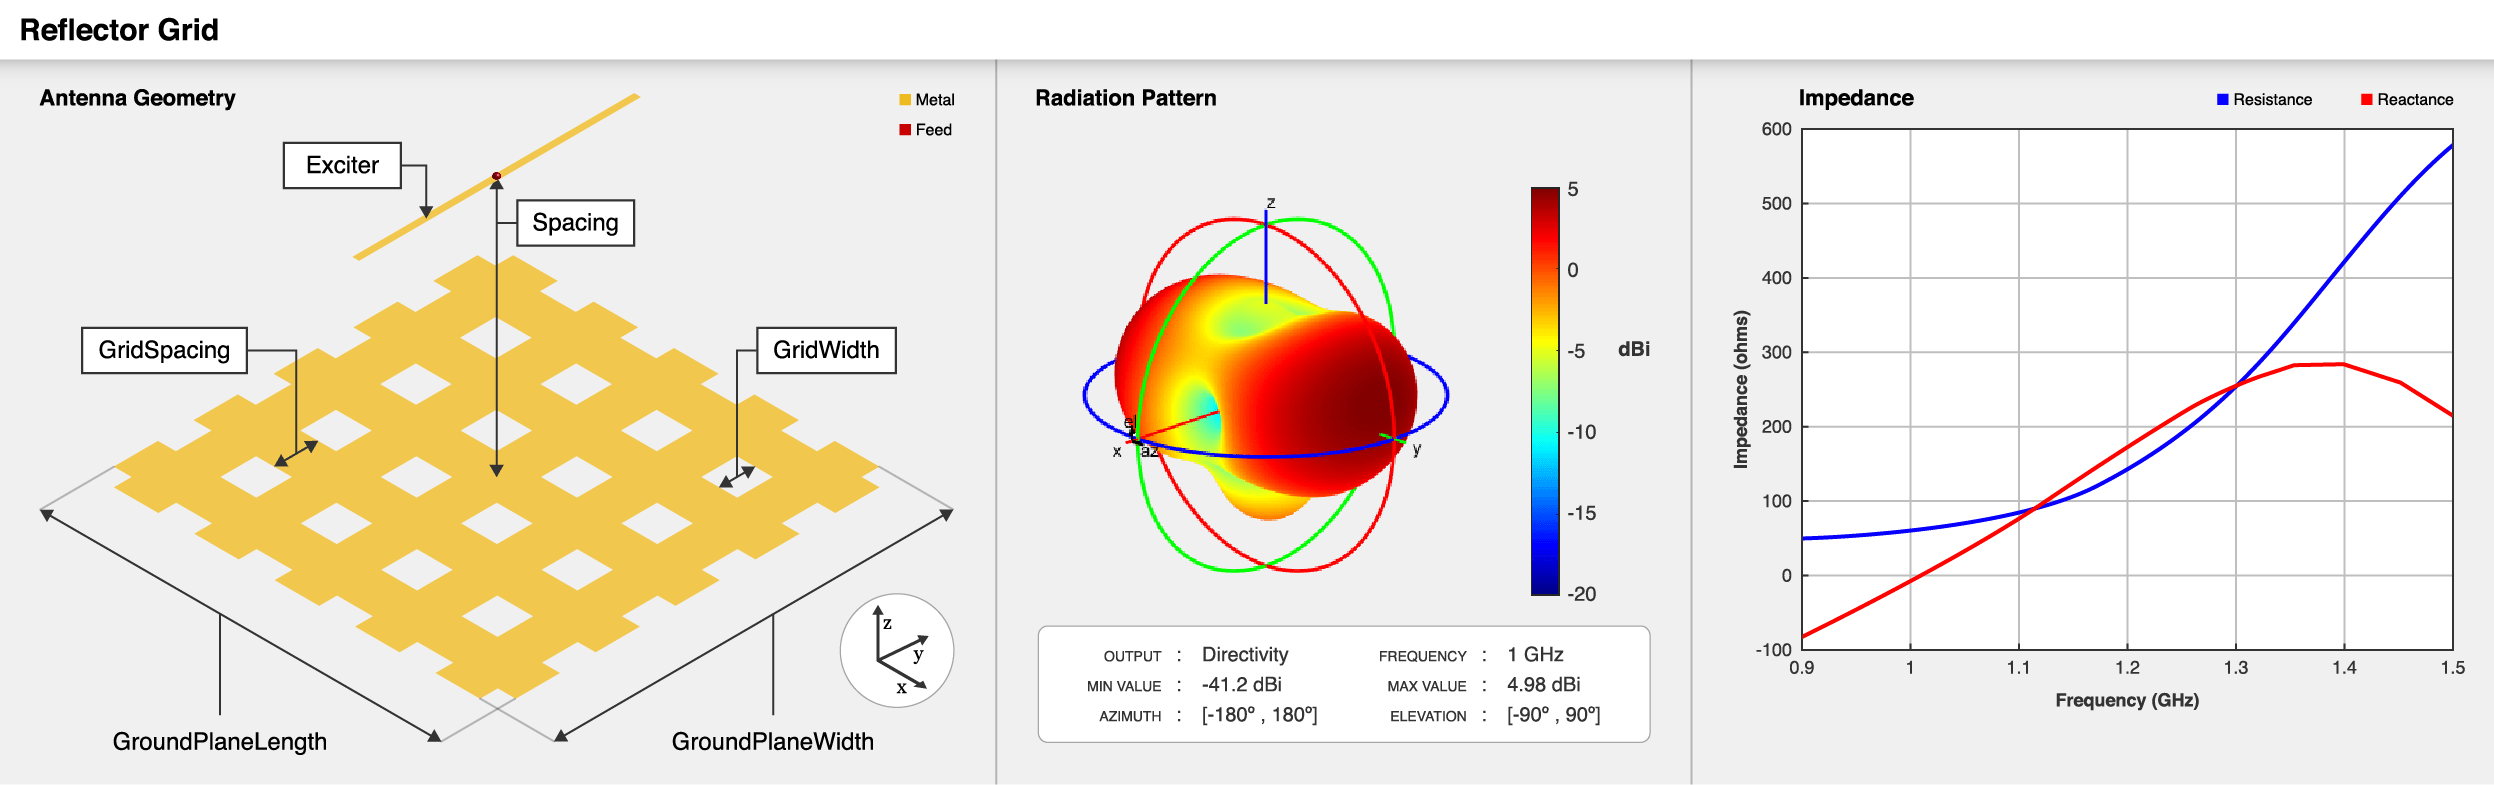 Grid reflector antenna geometry, default radiation pattern, and impedance plot.